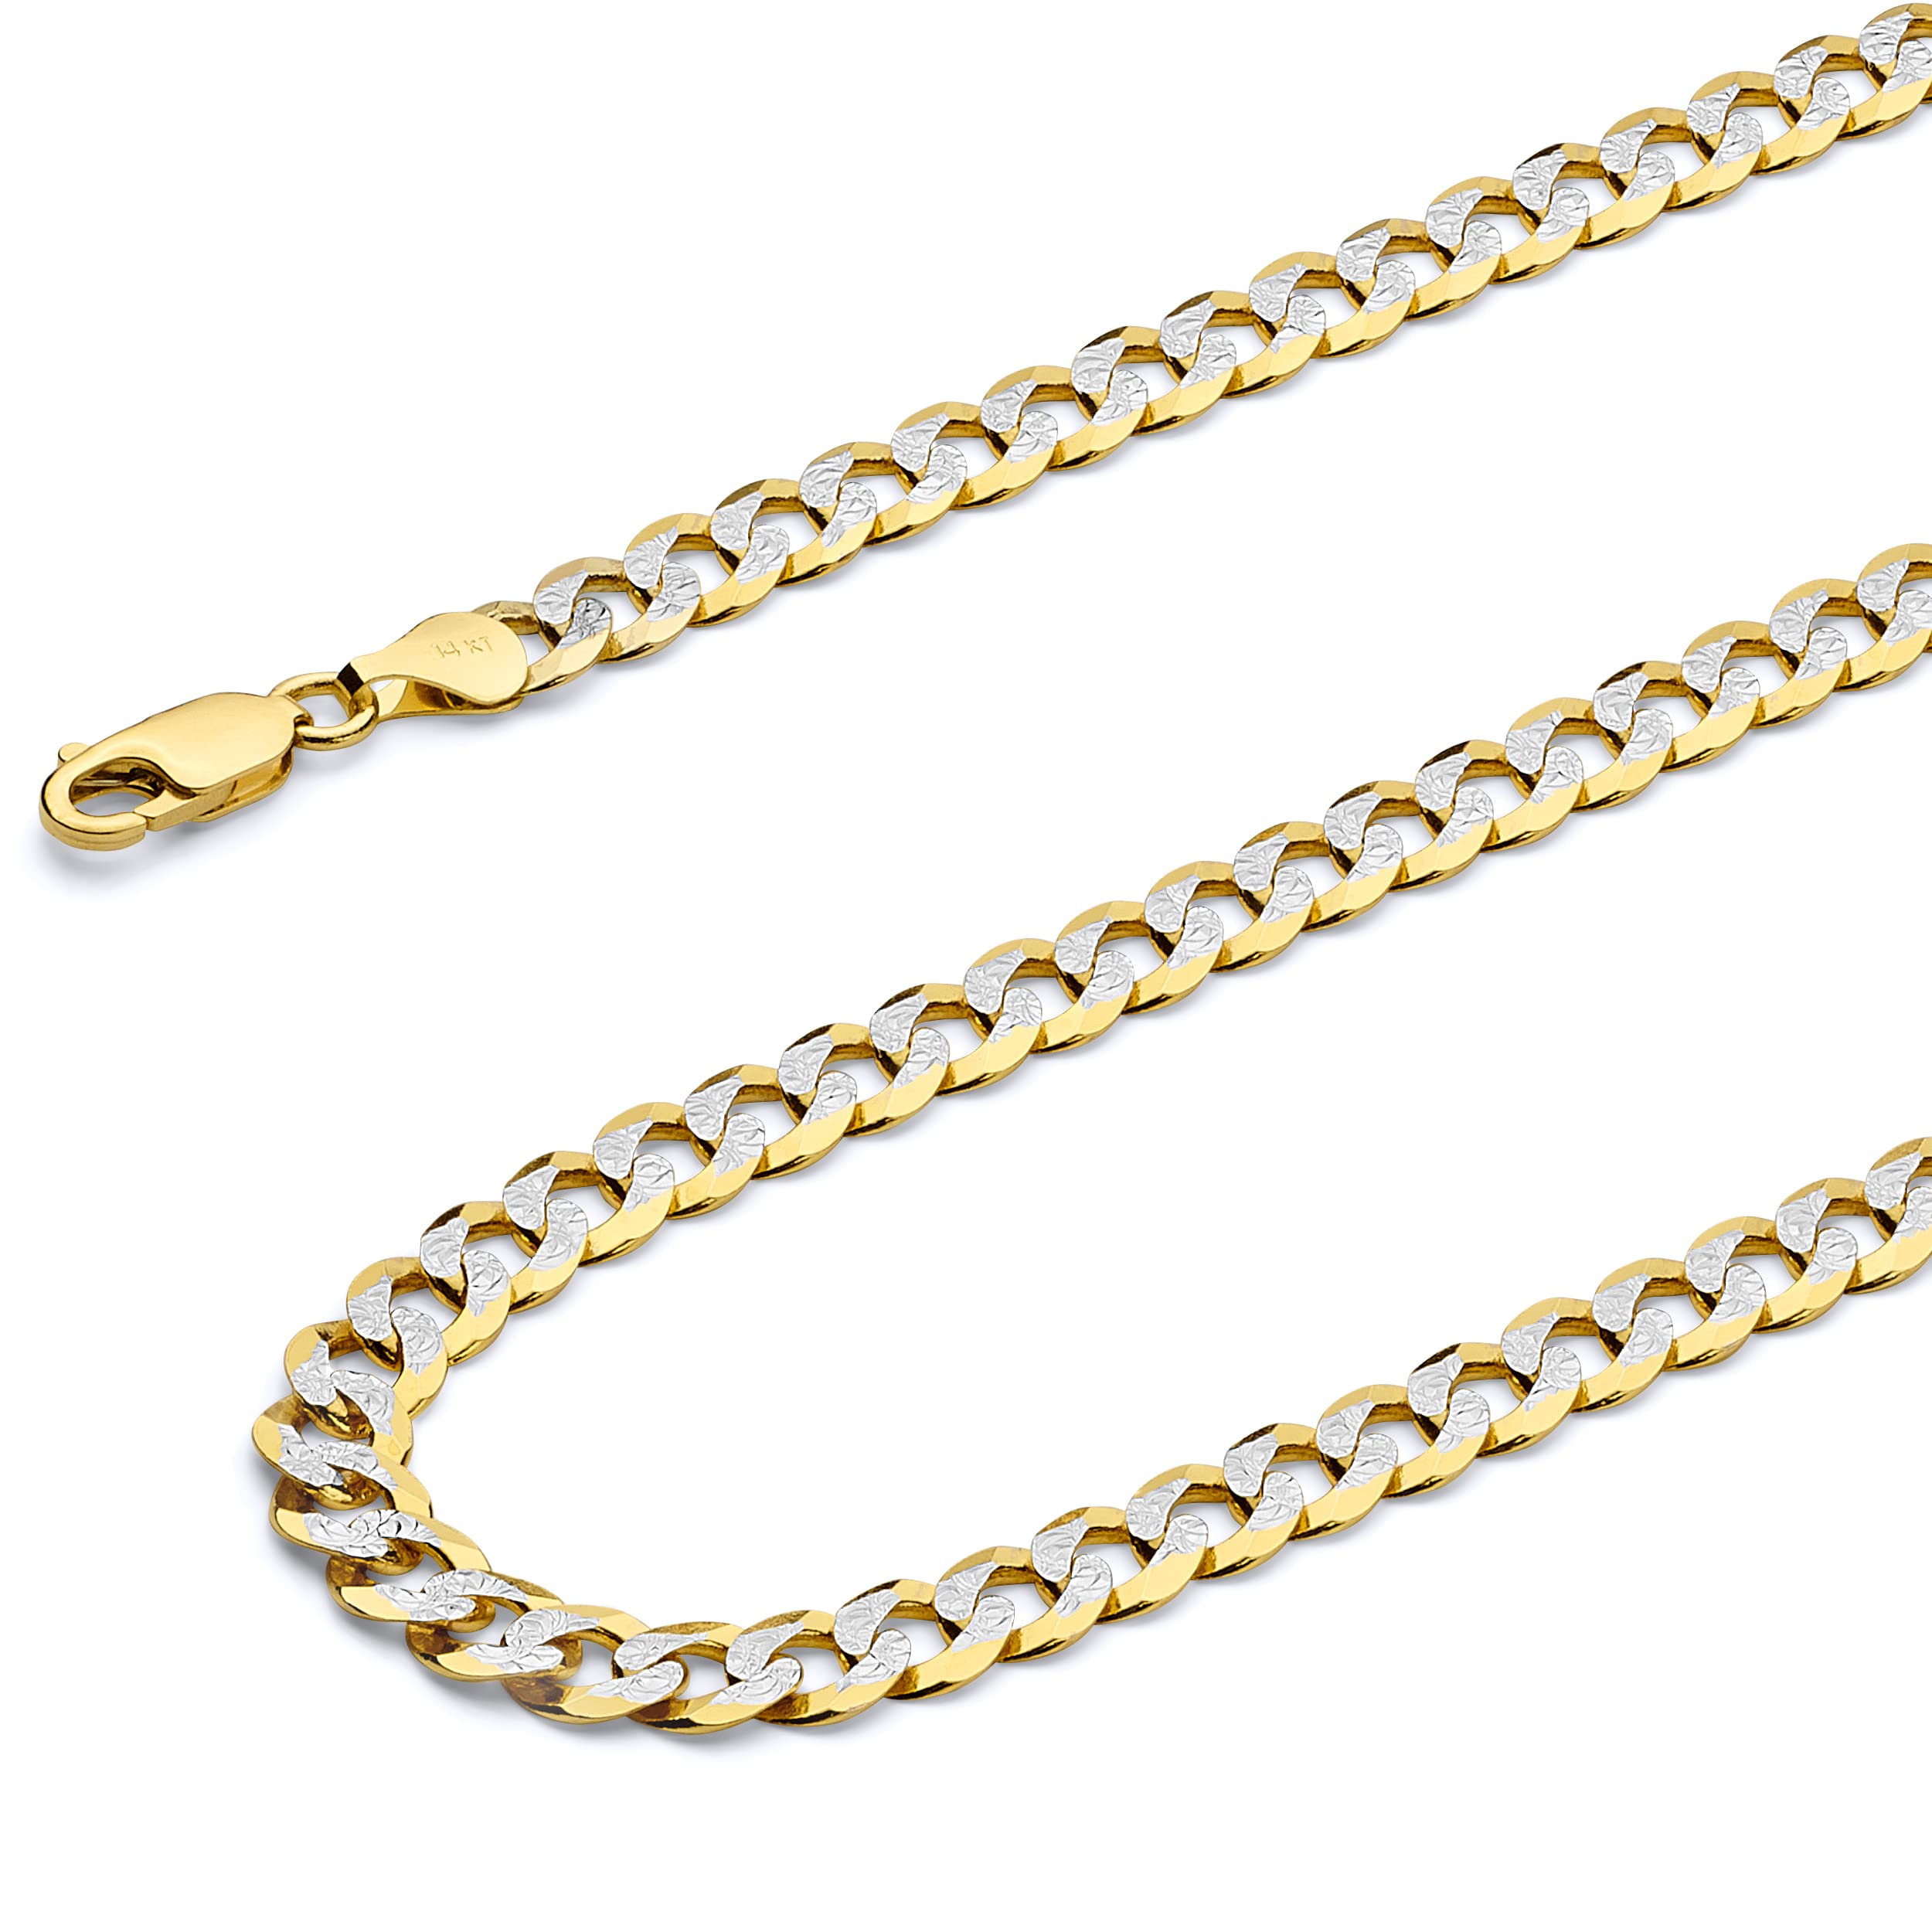 Wellingsale 14k Yellow Gold Solid 5.5mm Cuban White Pave Diamond Cut Chain Necklace